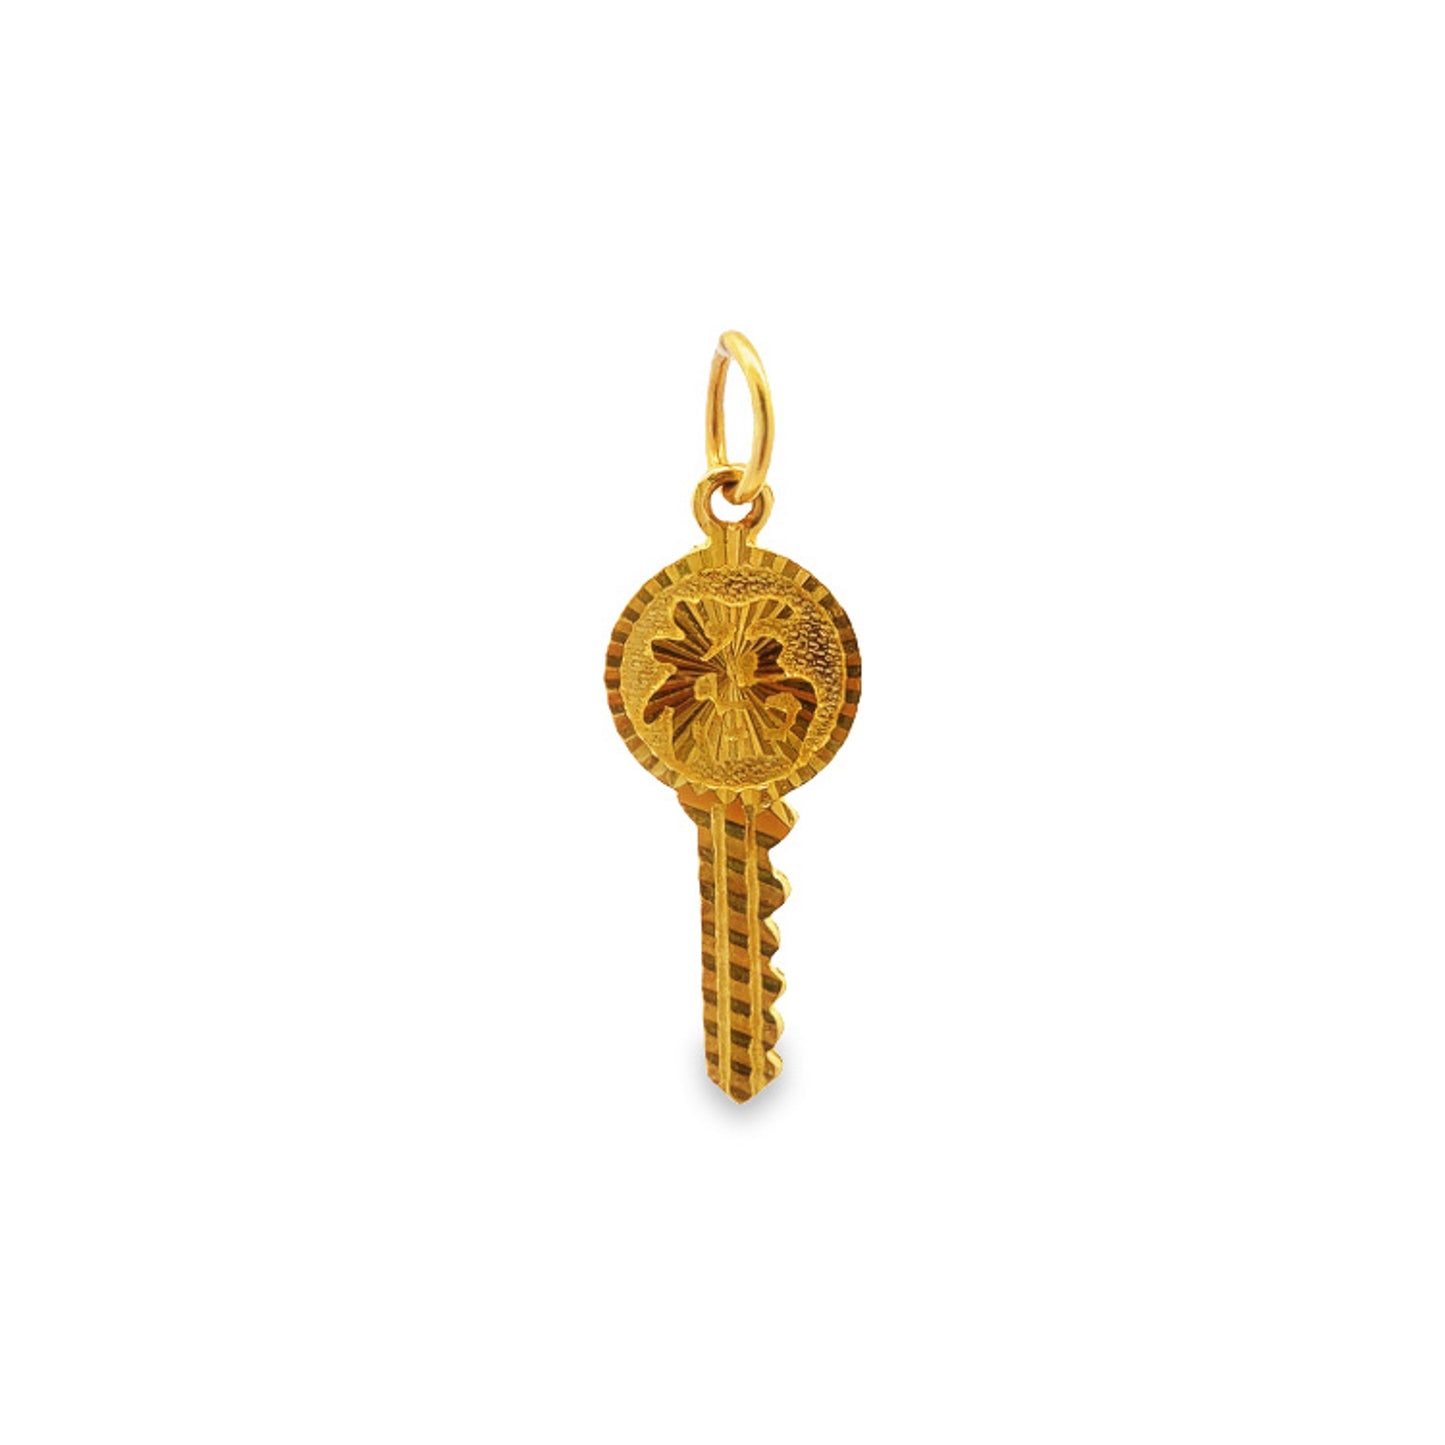 Load image into Gallery viewer, GOLD PENDANT ( 22K ) ( 1.76g ) - 0013038 Chain sold separately
